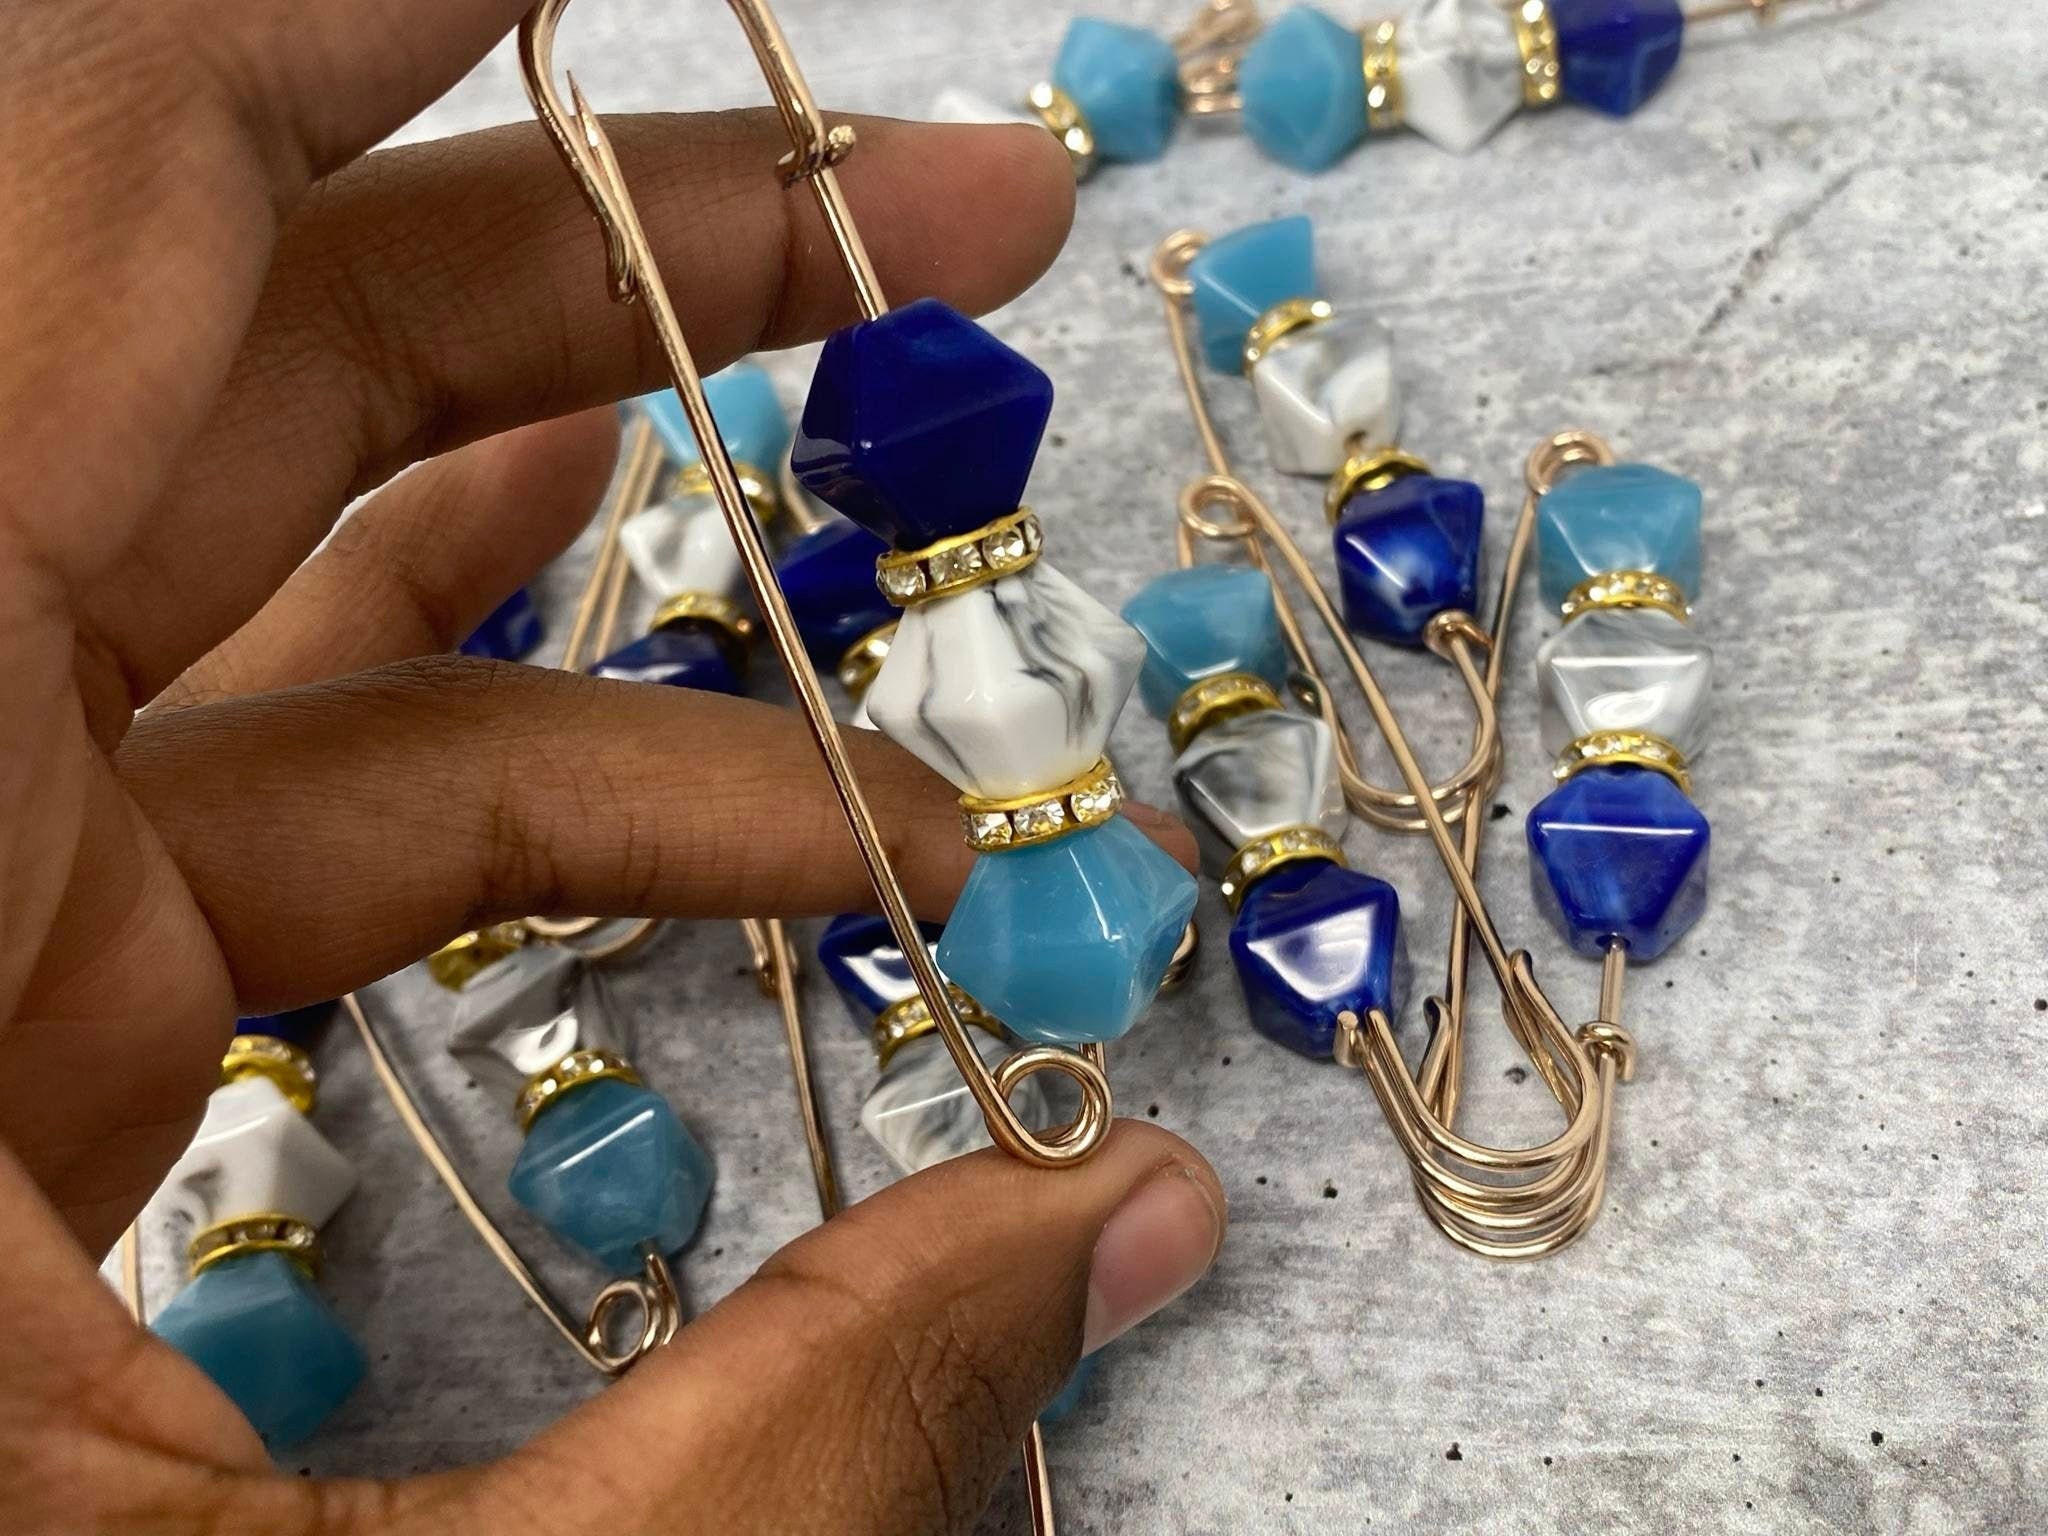 6-pc set, Shades of BLUE Resin Beads w/Gold Bling, Safety Pin